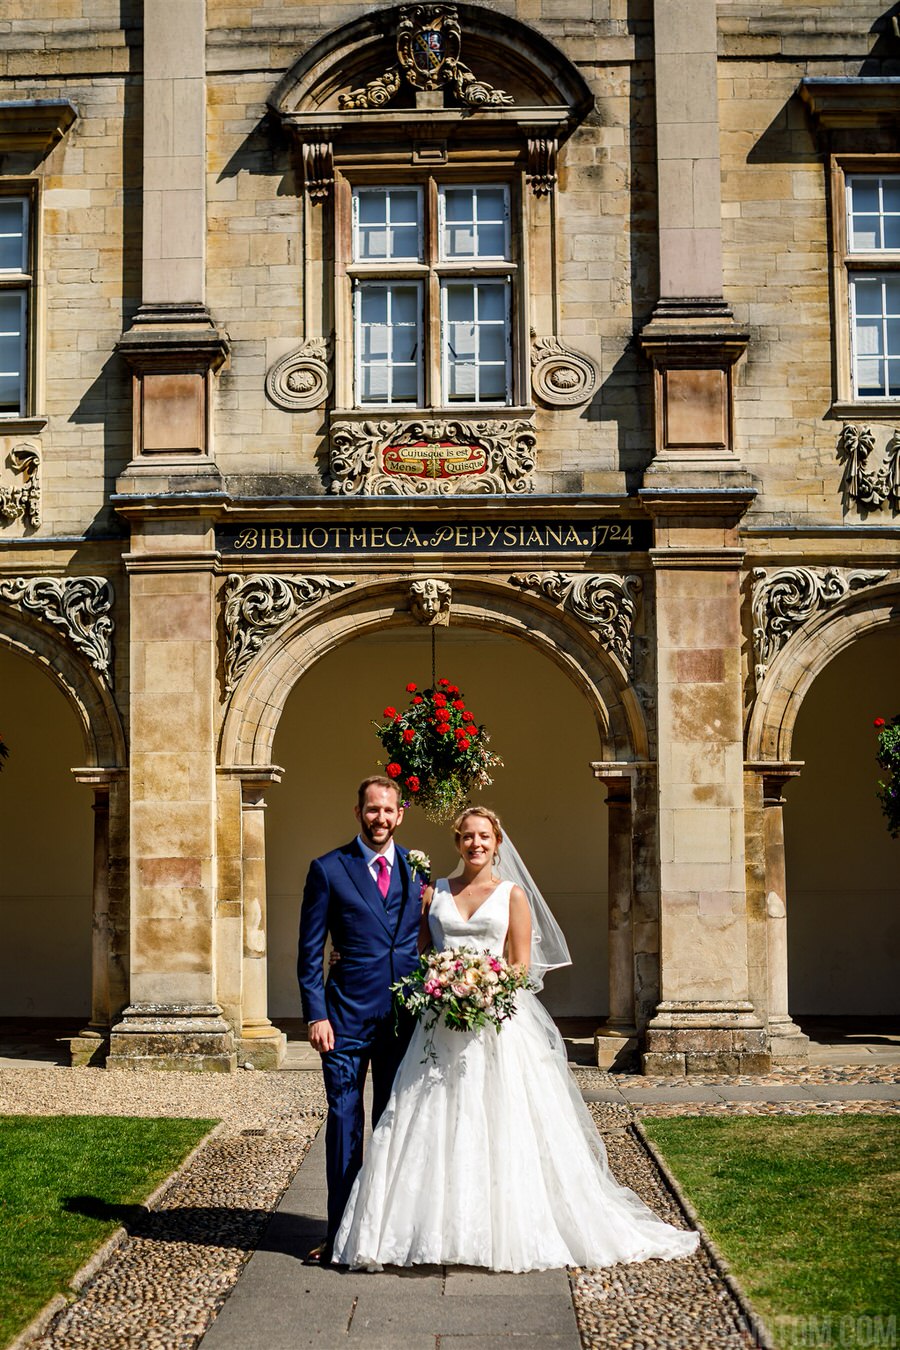 Steph & Tom's classic, timeless Magdalene College wedding, with photography by Lina and Tom (13)